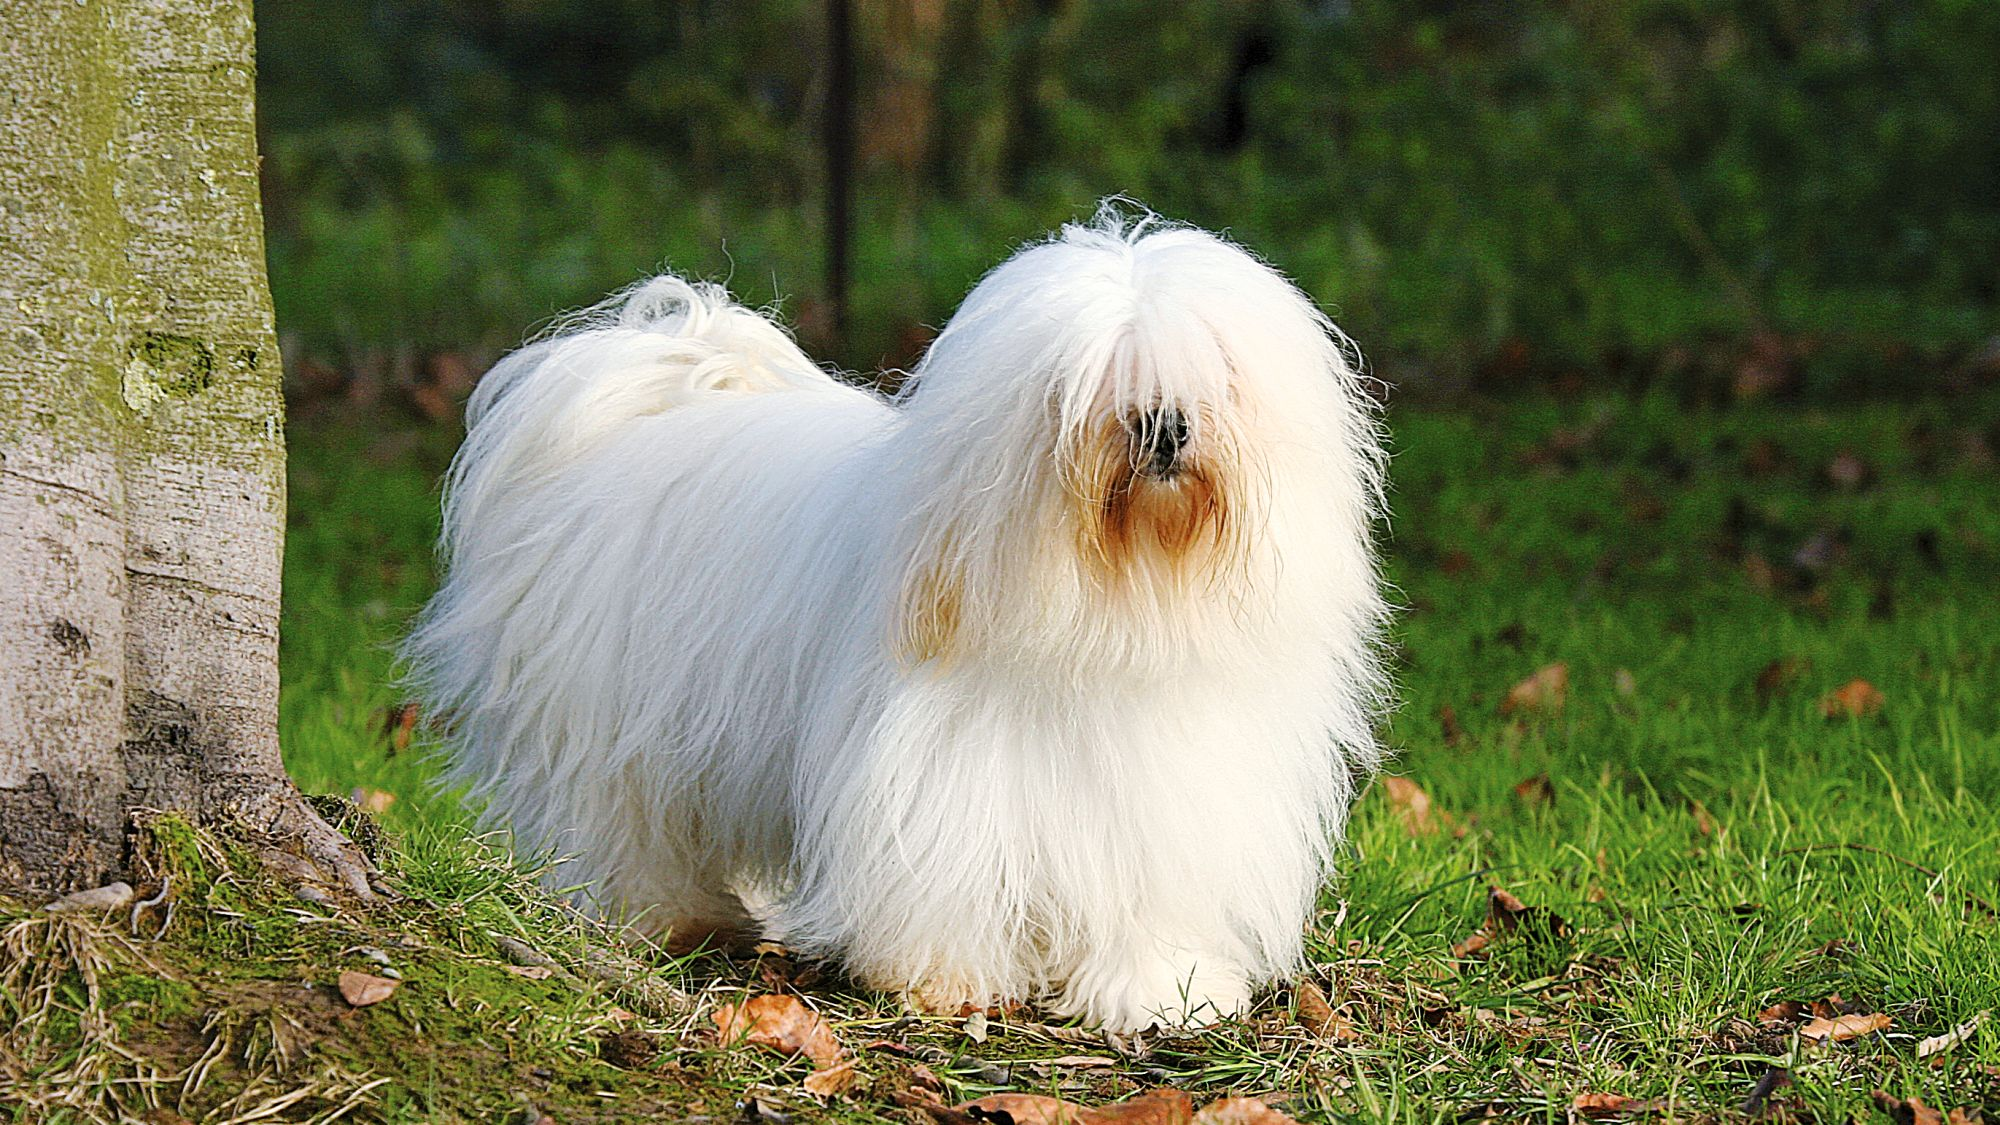 Long-haired Coton de Tulear dog standing by a tree